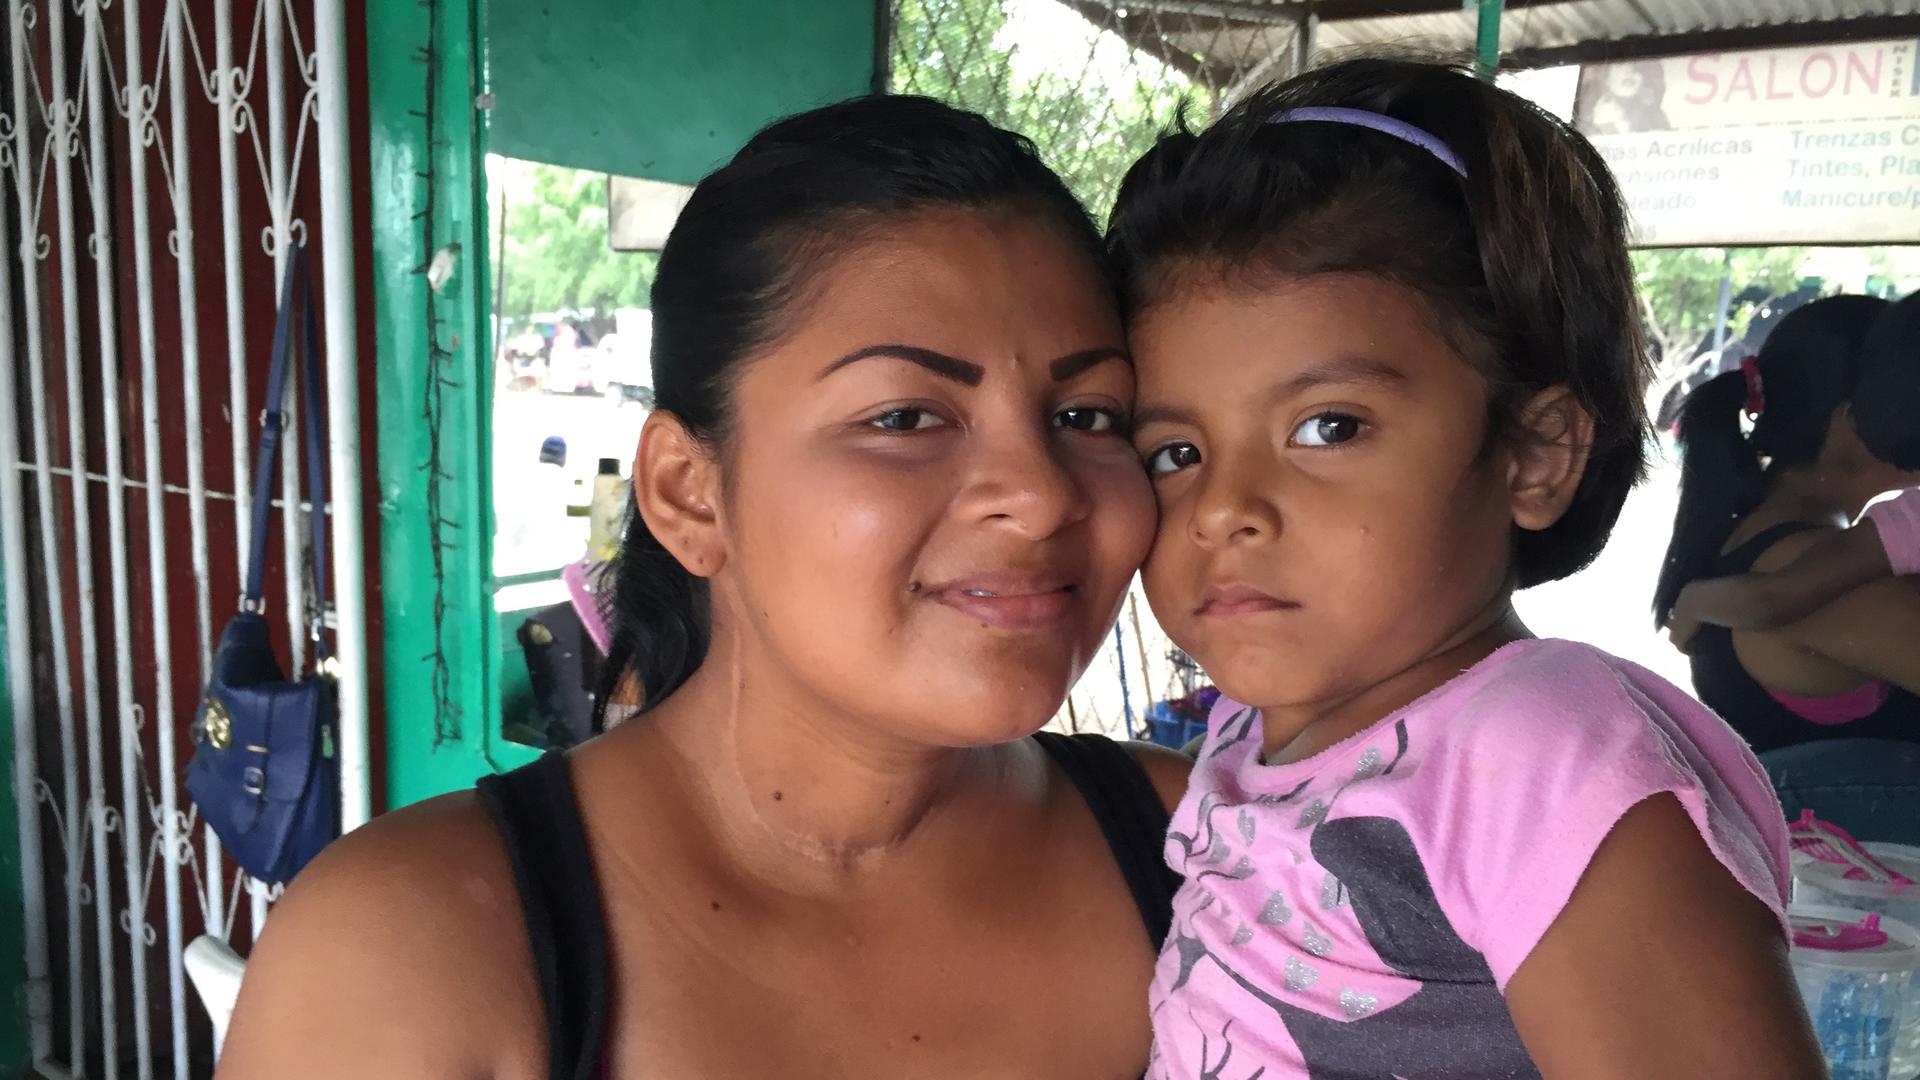 Franci Machado brings her four-year-old daughter to work every day because she can't afford childcare. She says if she died because she couldn't get chemotherapy to treat her cancer no one would take care of her two children.